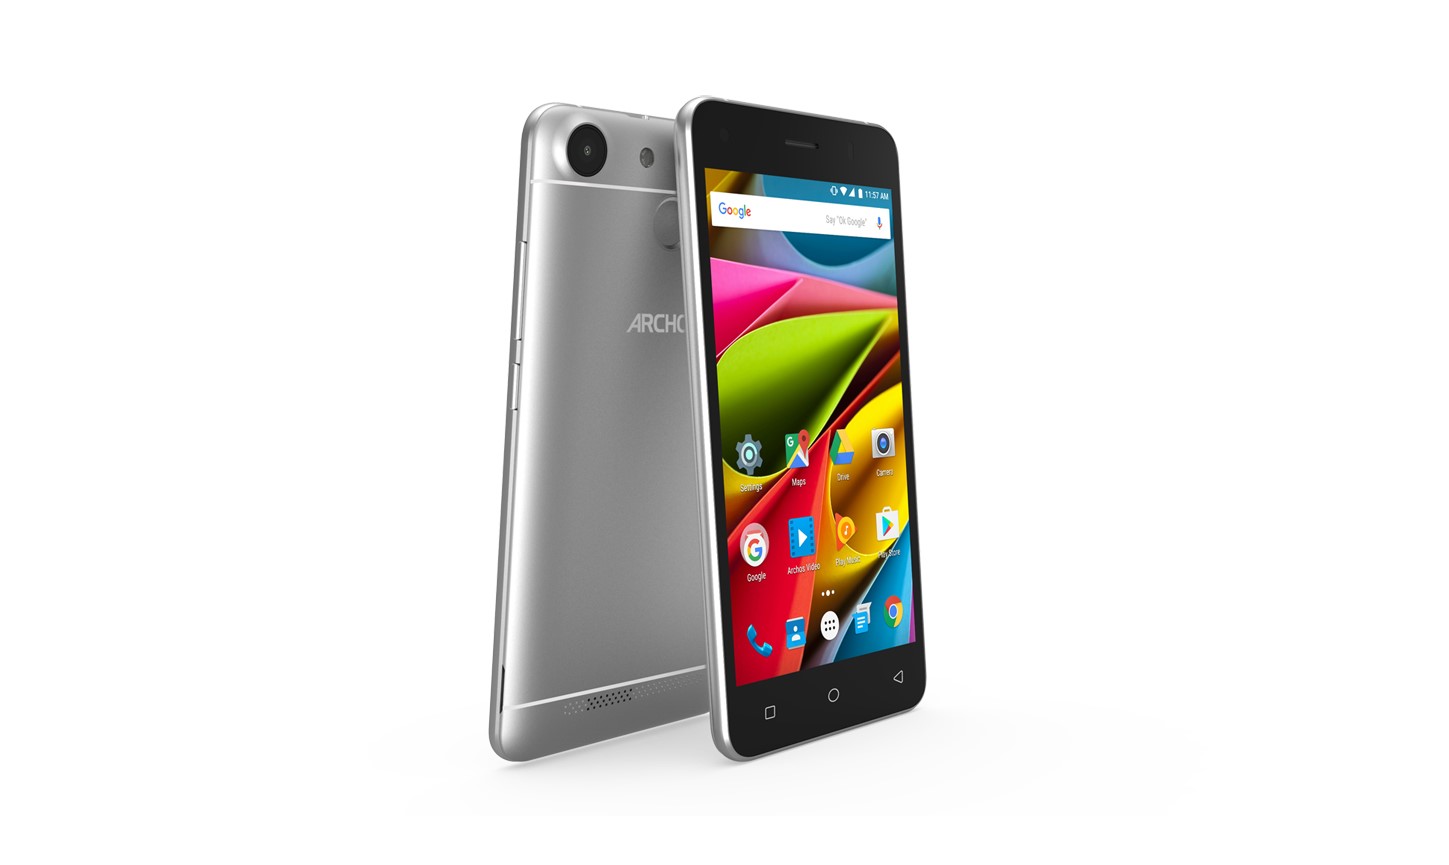 archos-cobalt-and-power-smartphone-news-and-pricing